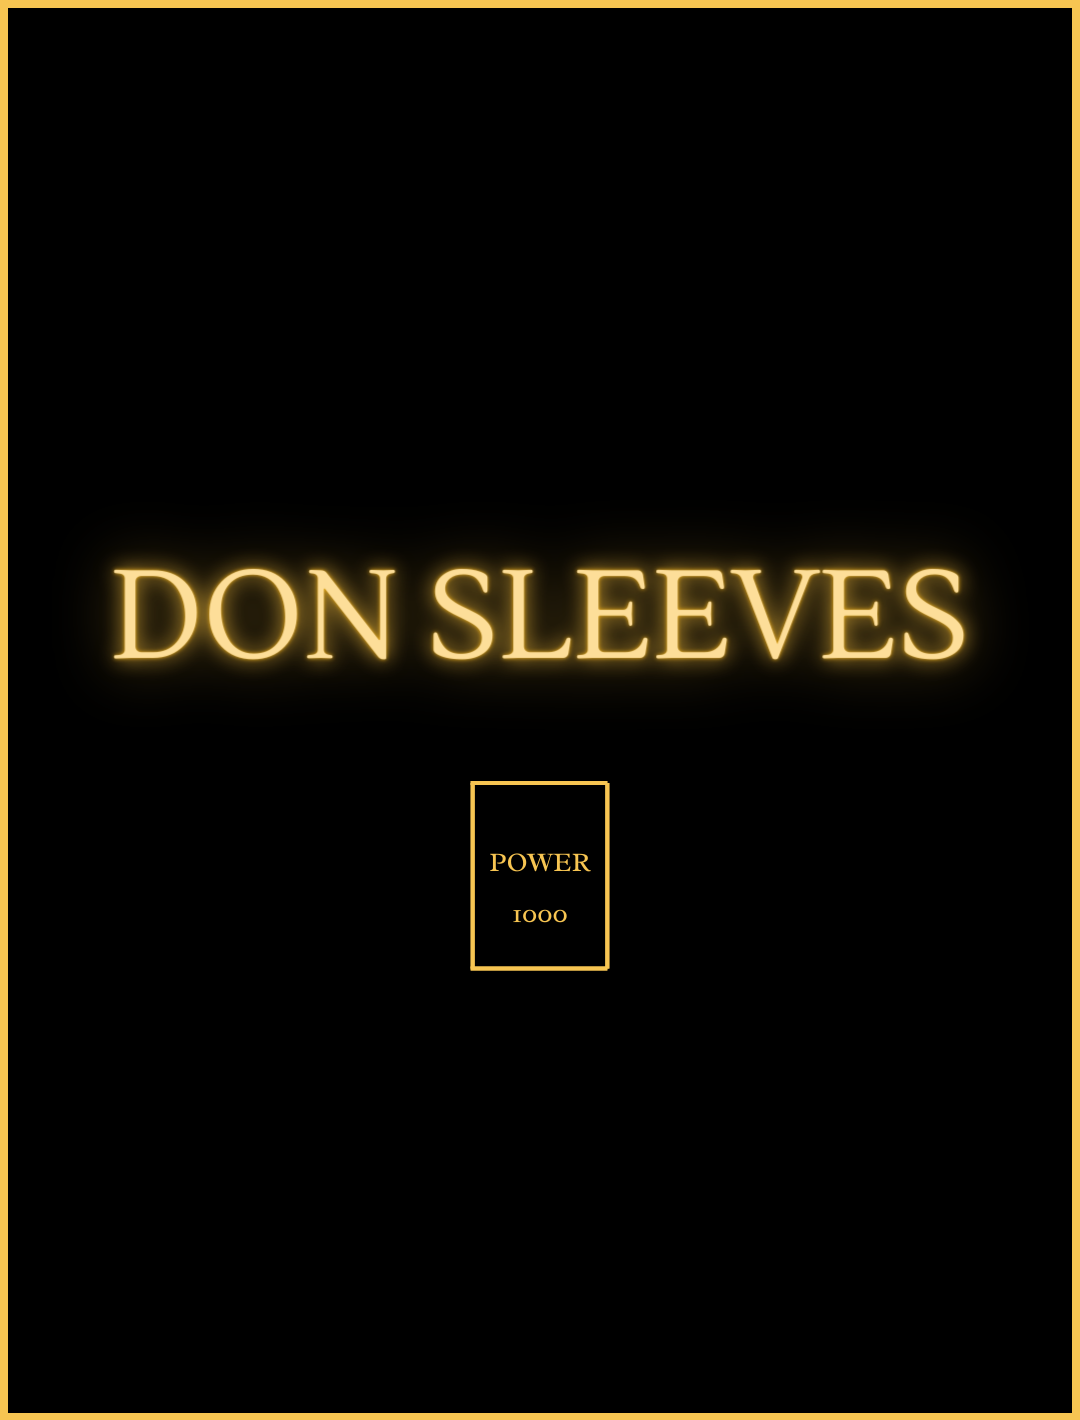 DON SLEEVES